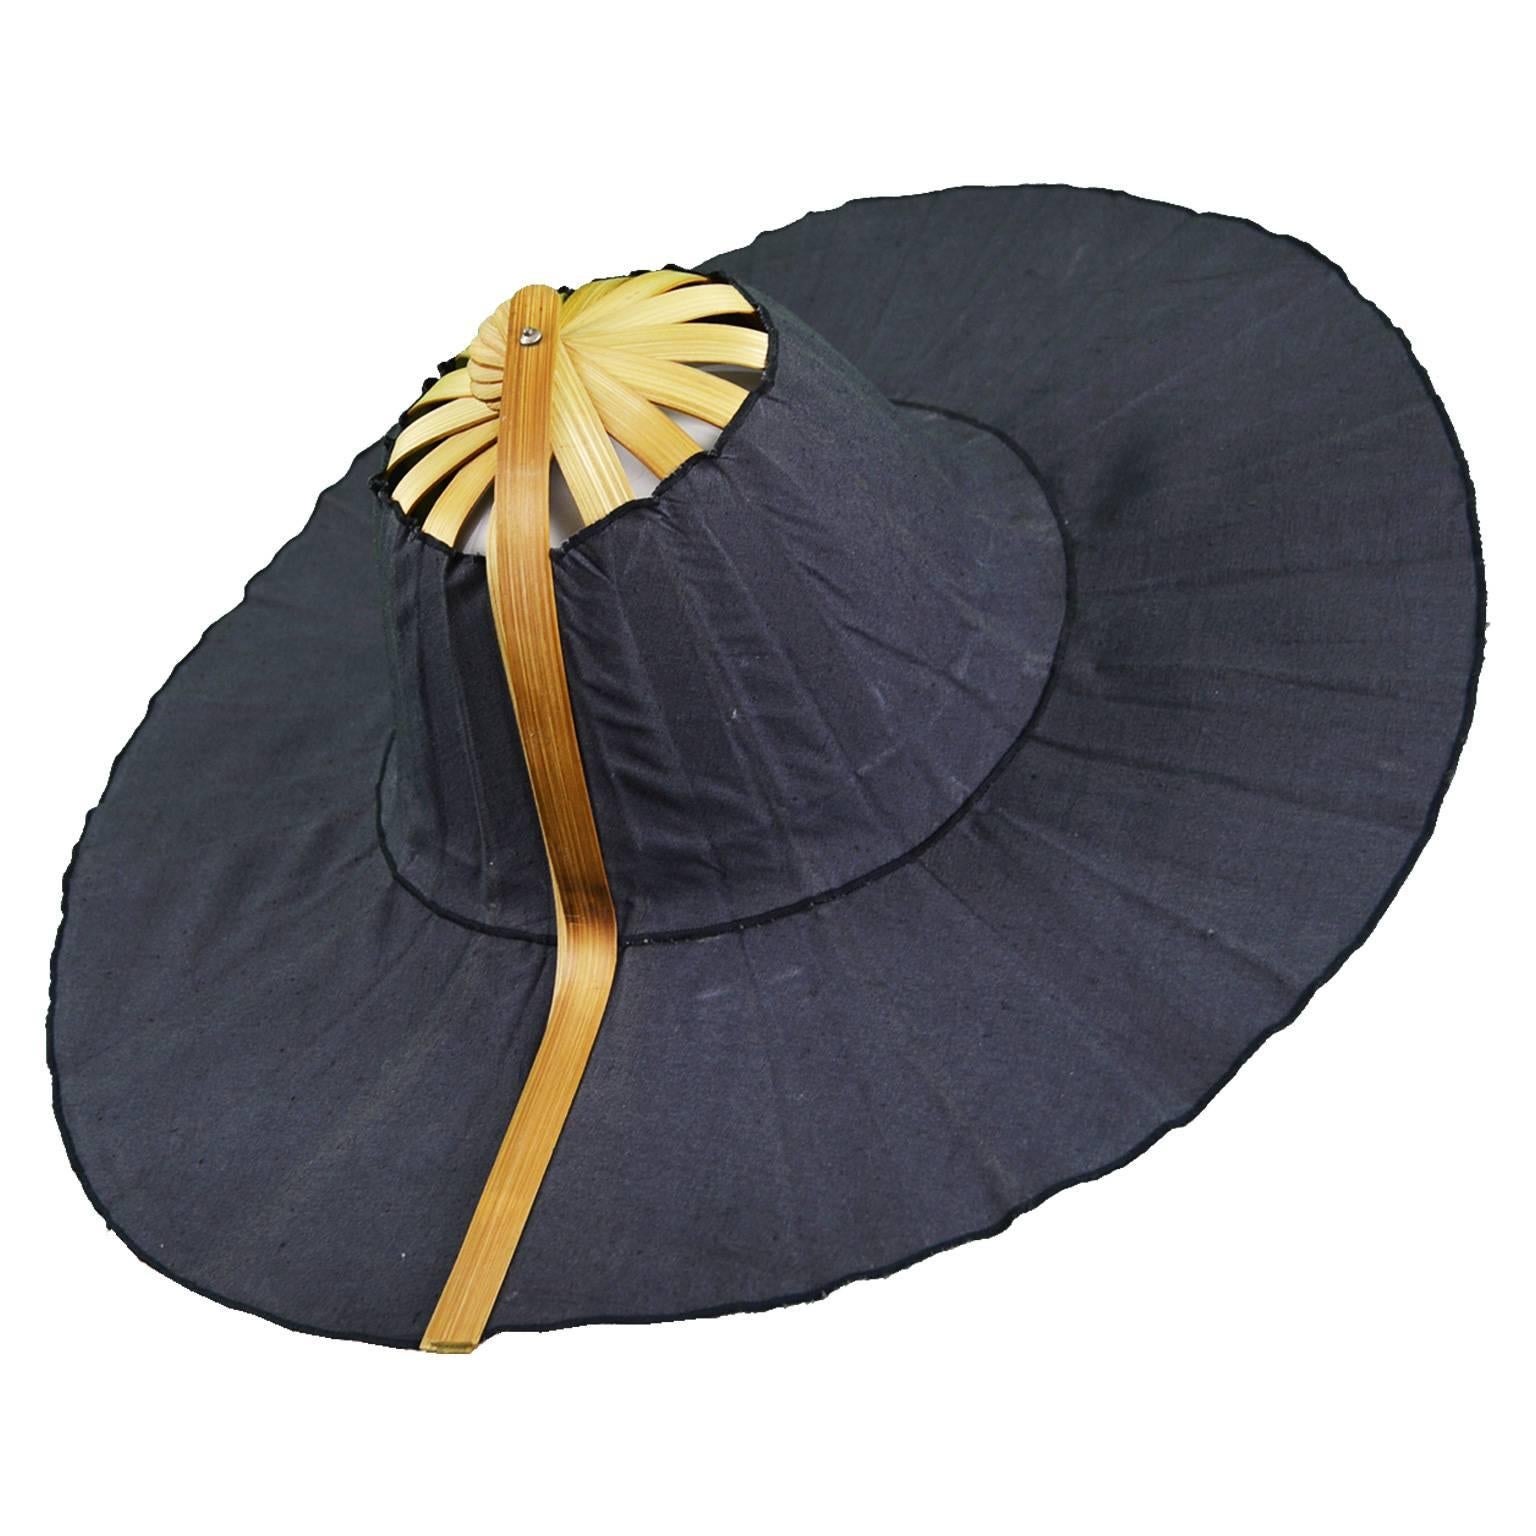 Heather Allan Architectural Folding Wood and Cotton Fan Sun Hat, 1990s